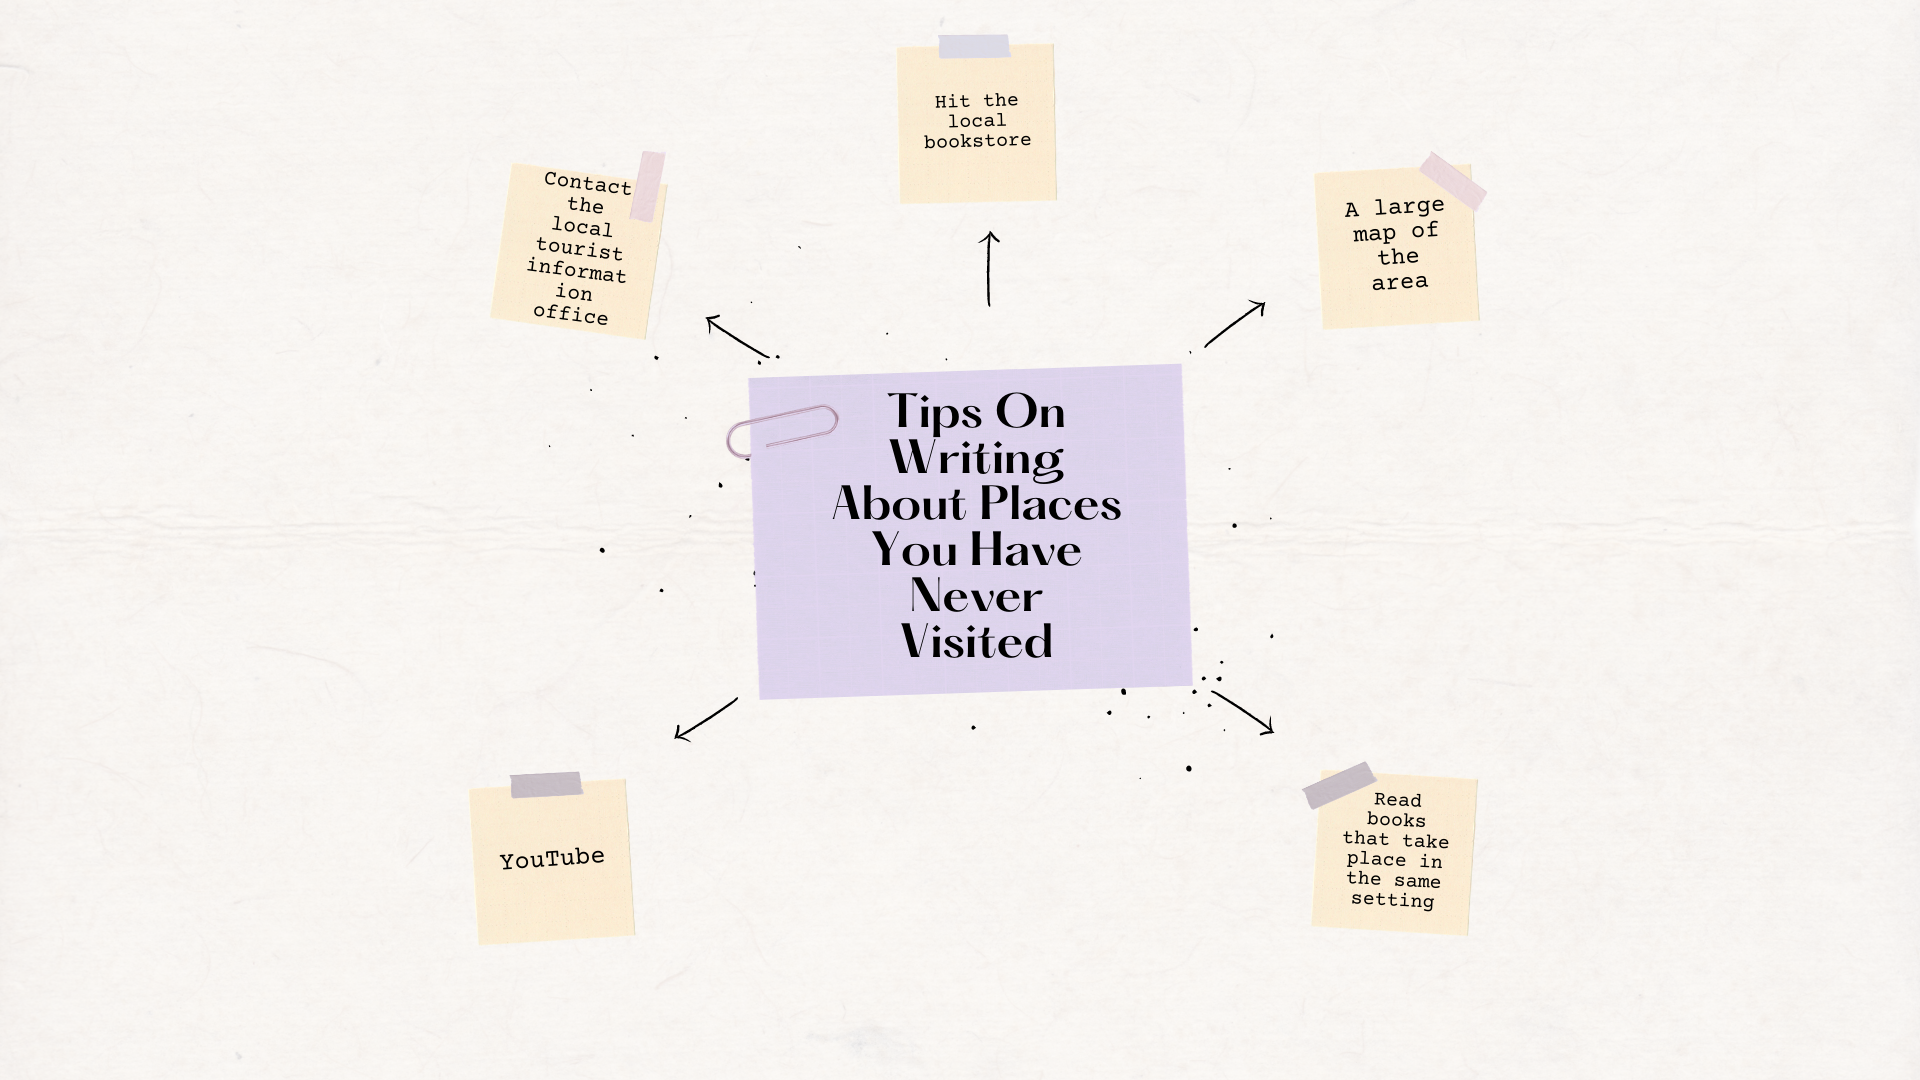 Tips On Writing About Places You Have Never Visited